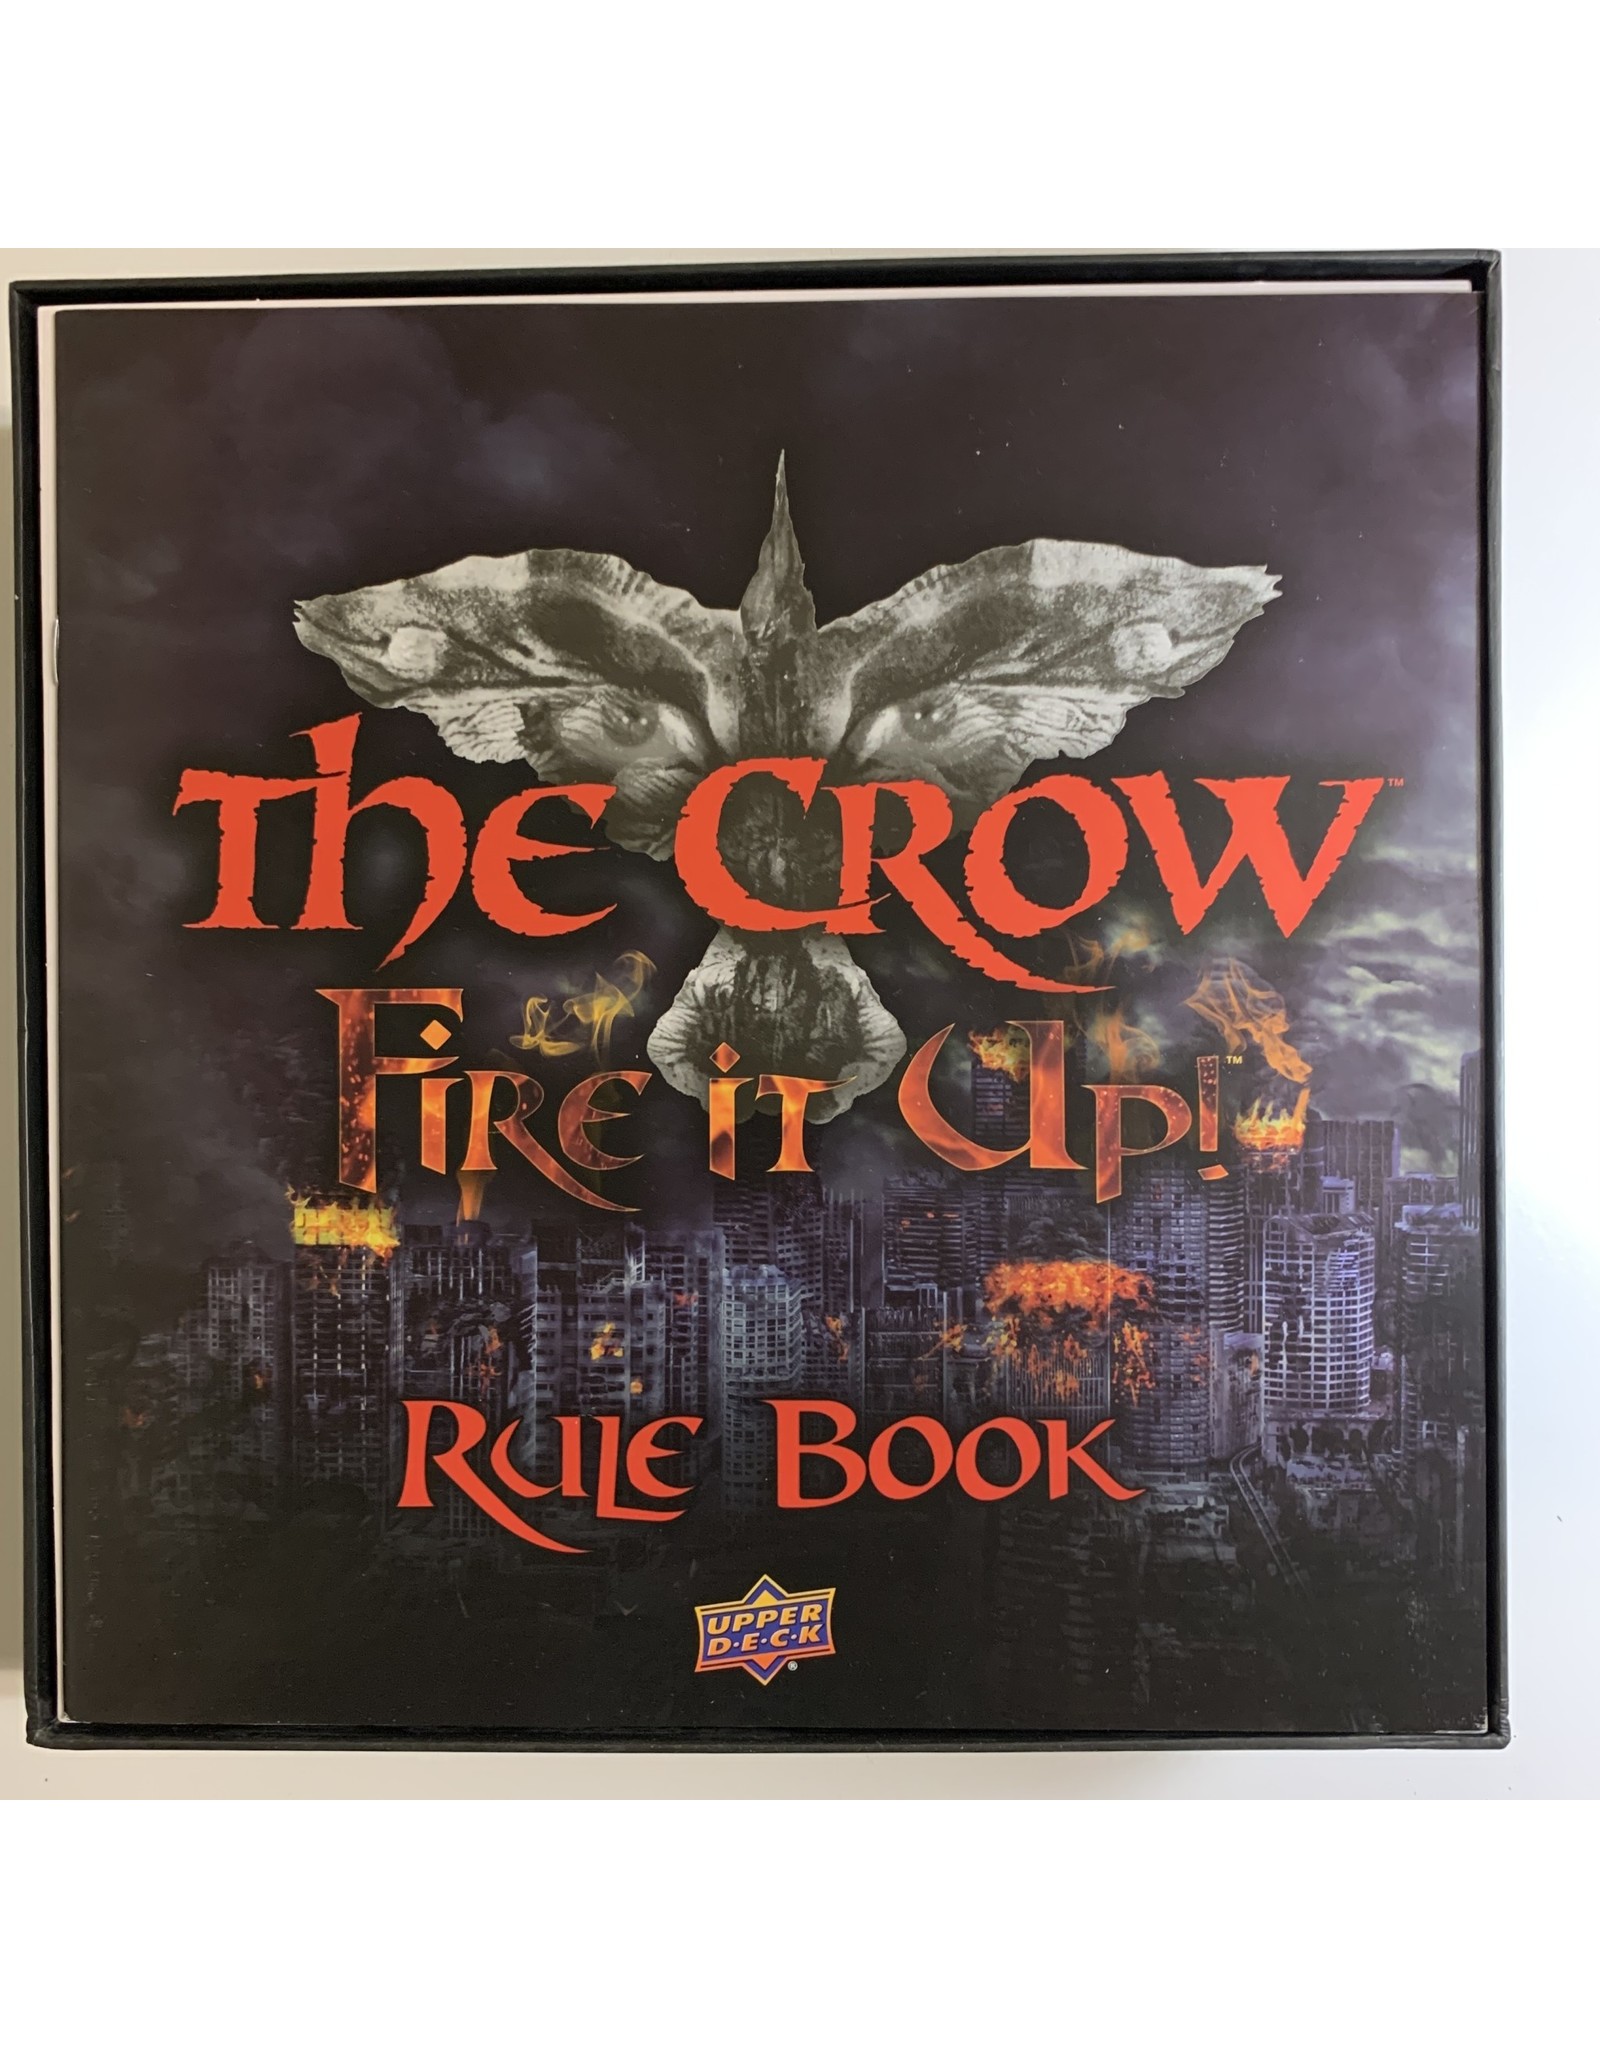 Upper Deck The Crow: Fire It Up! (2016)